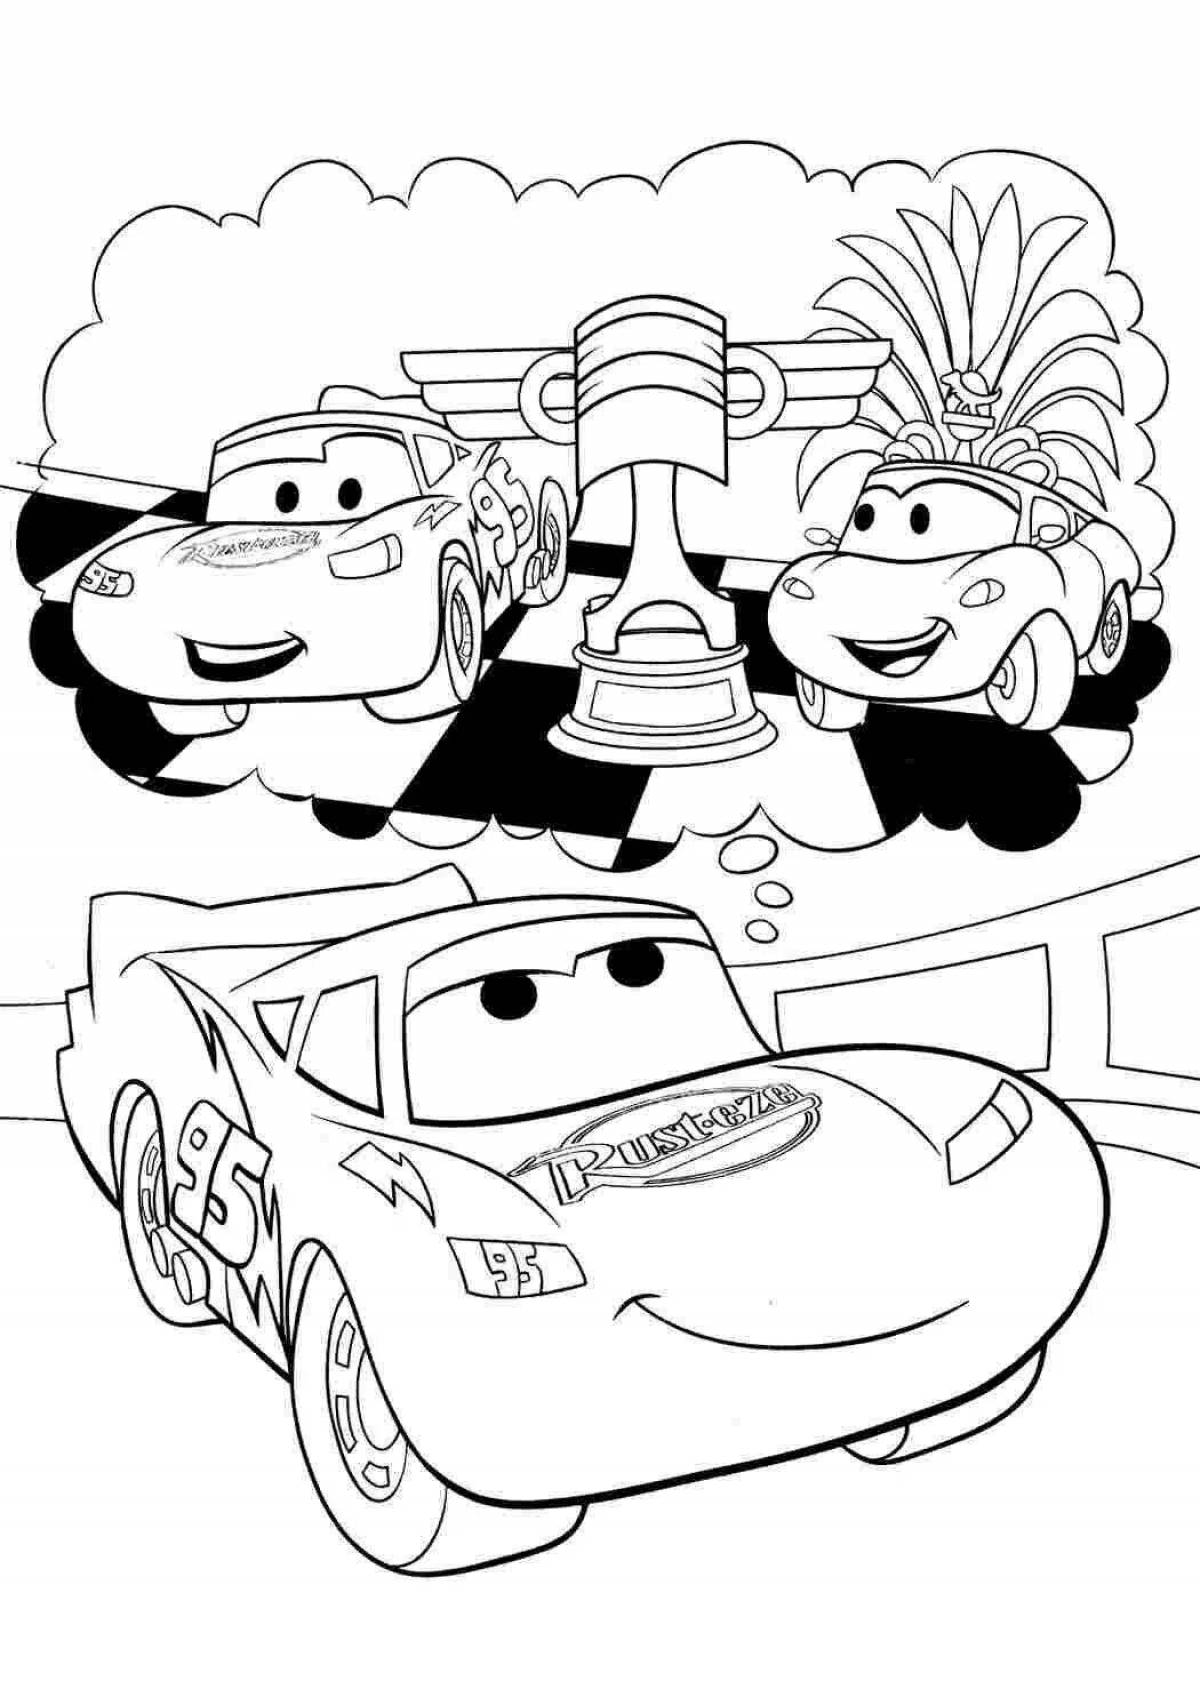 Coloring page charming cars mcqueen